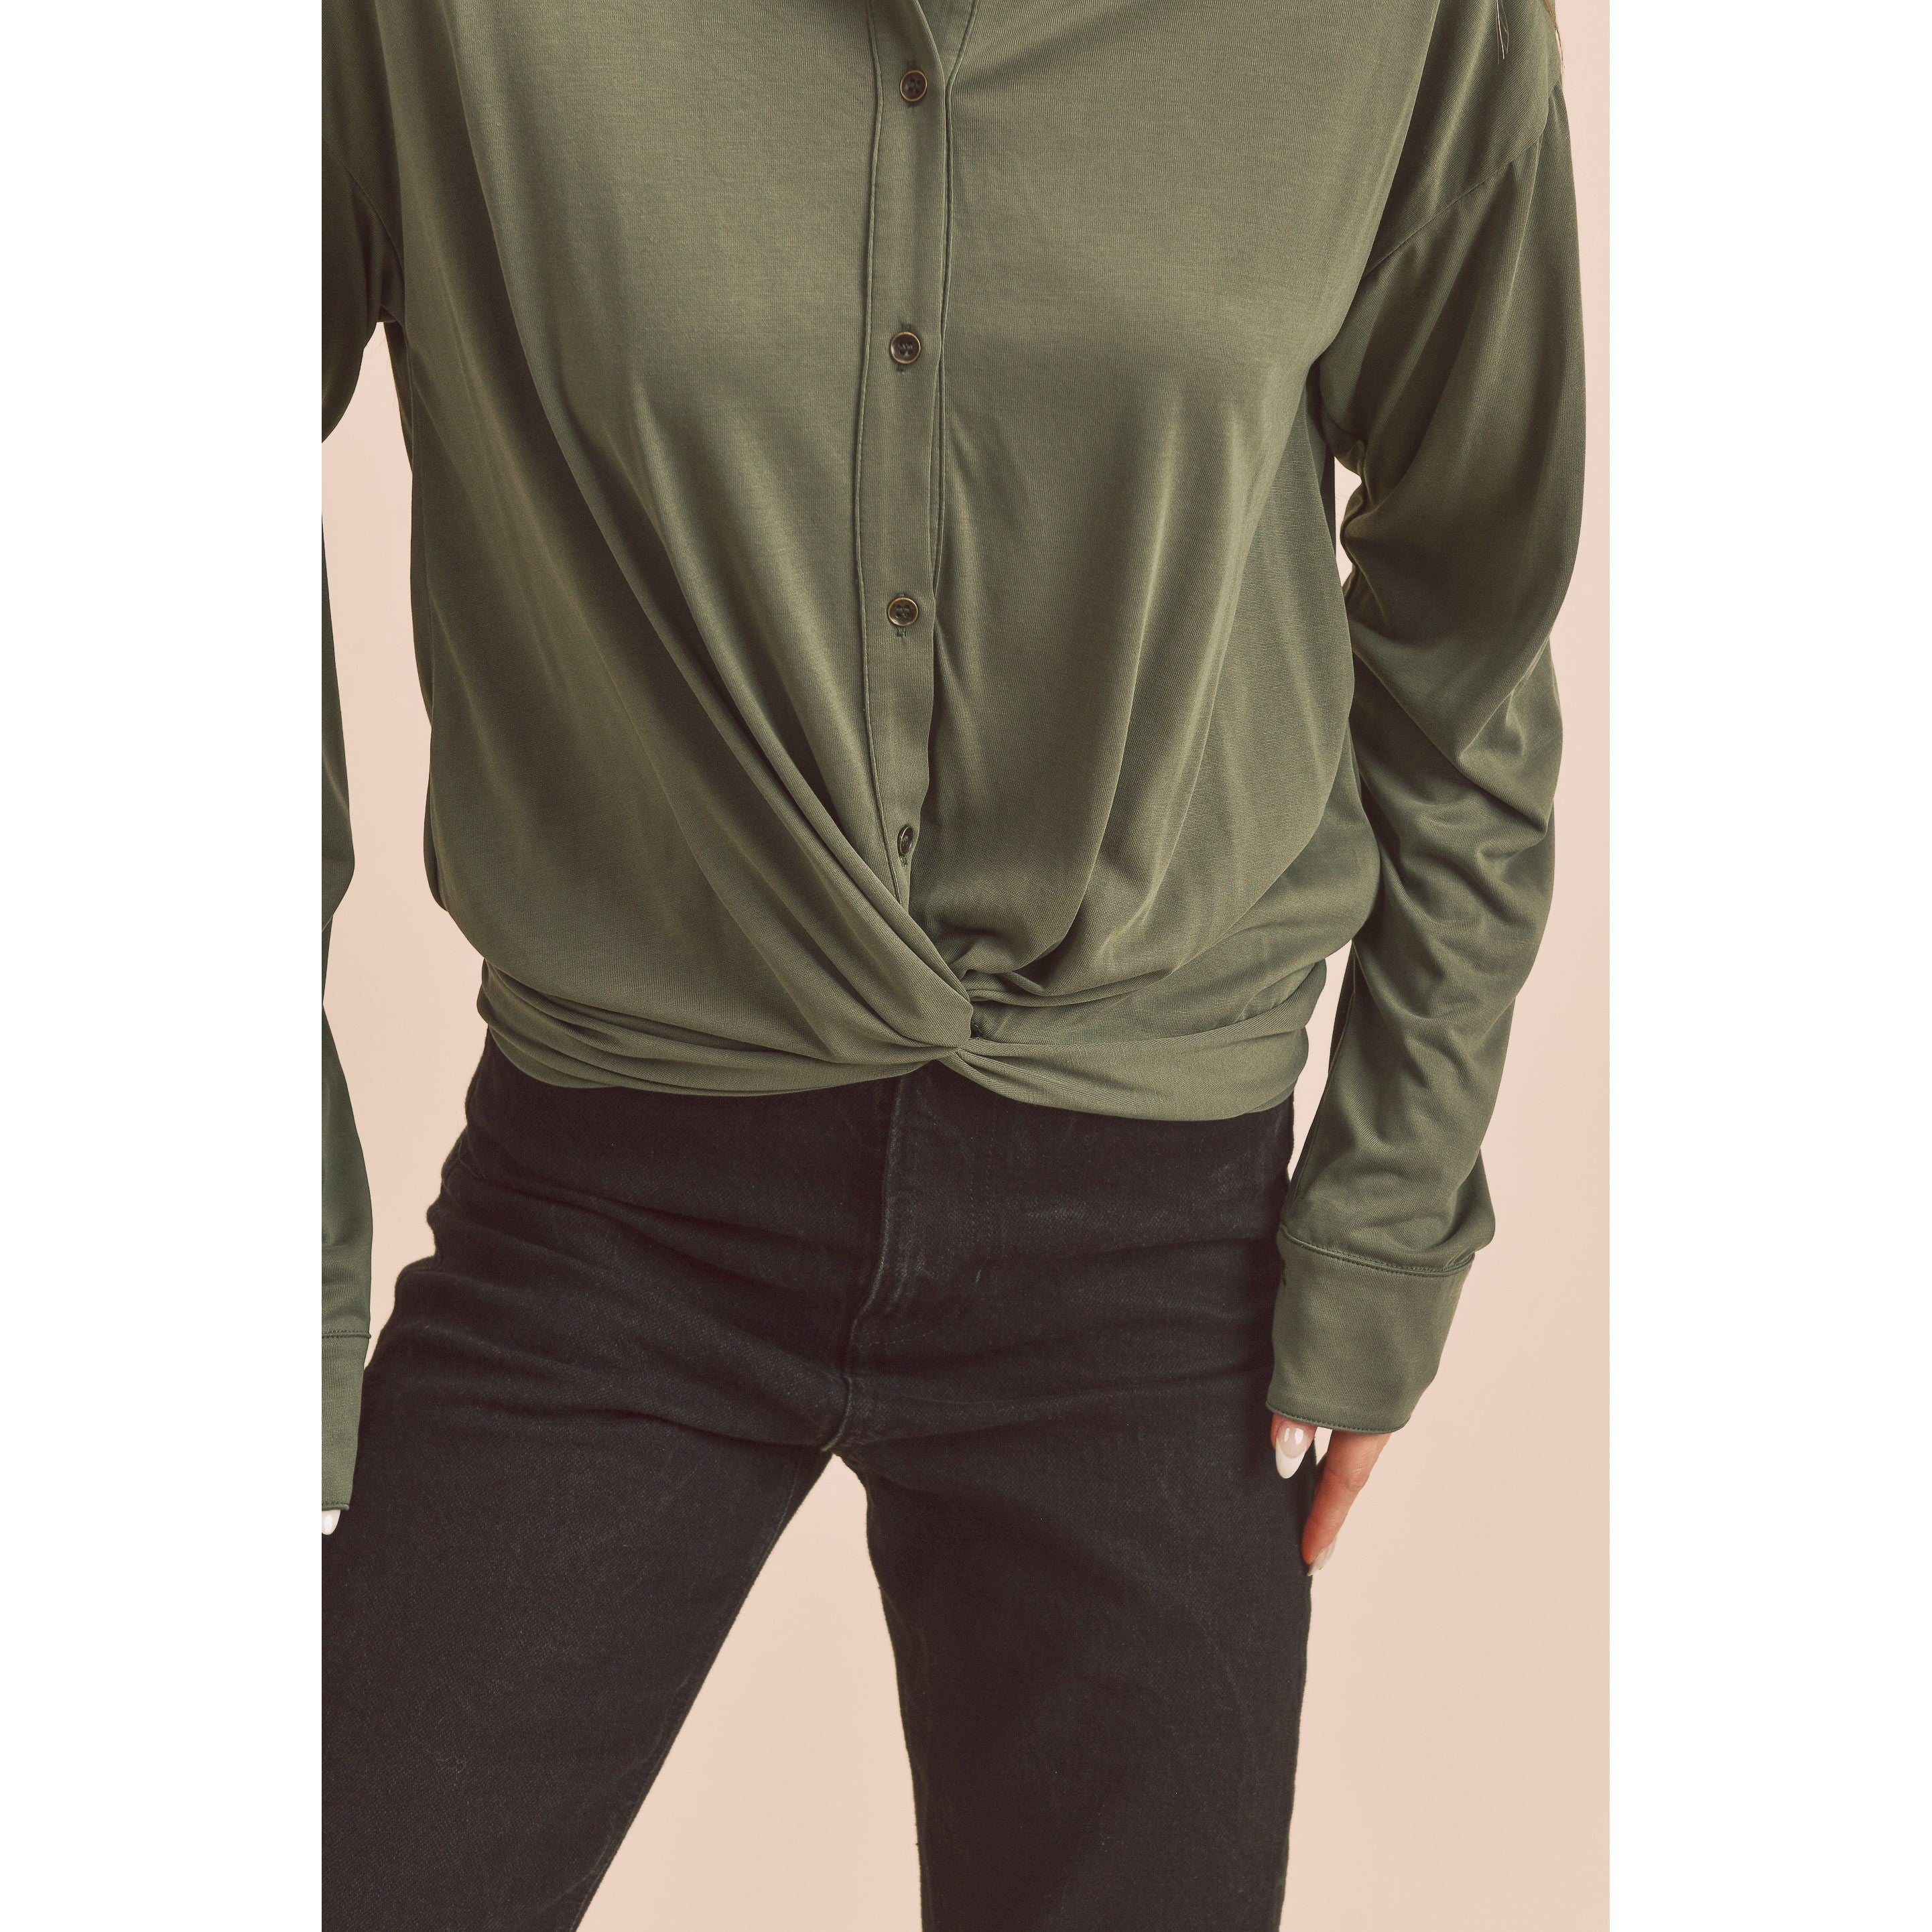 Button Up Twist Front Top || Olive